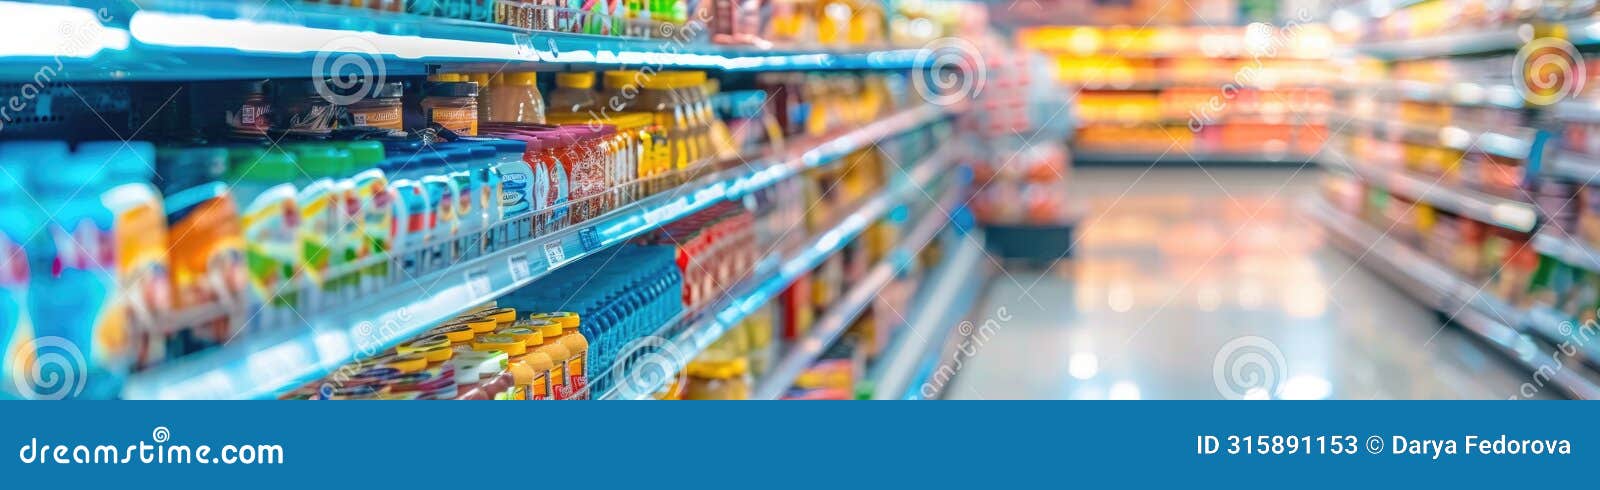 supermarket aisles with colorful products in soft focus background